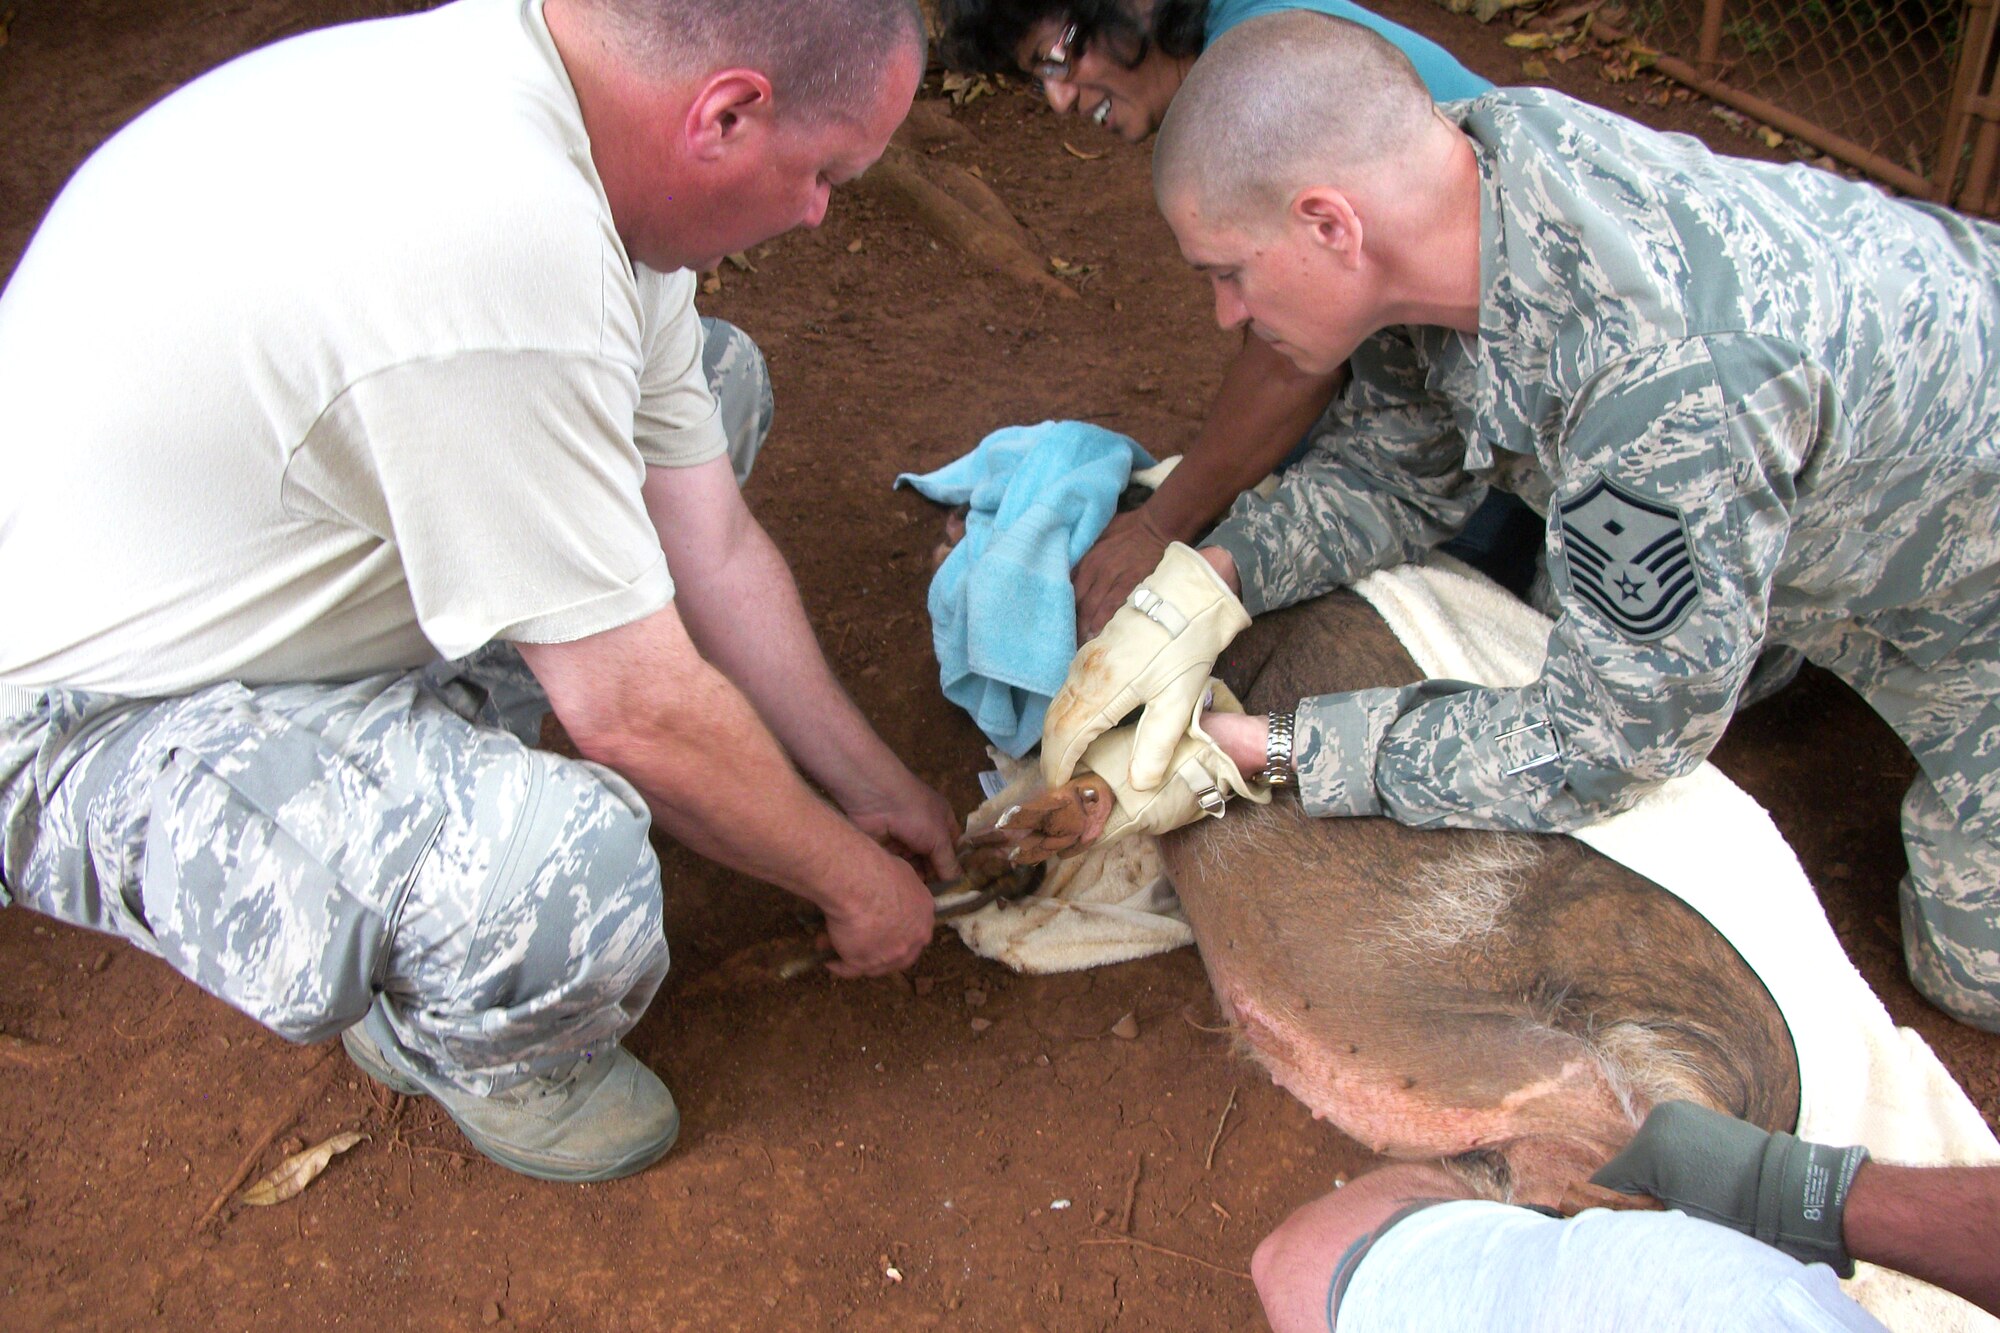 LANAI, Hawaii - Lt. Col. Jay Fuller, a bioenvironmental engineer fromt the 176 Medical Group and civilian verterinarian, and Master Sgt. Ryan Voigt, the first sergeant and bioenvioronmental technician from the 176 Medical Group, clip a local woman's pig's toenails here June 11, 2013, as part of basic veterinary care. Forty-five Alaska military personnel from Air and Army National Guard and active-duty Air Force set up and ran medical clinics for medically-underserved Hawaiians on the islands of Lanai and Maui as part of an Innovative Readiness Training project June 4 to 12. The group joined about 500 other military personnel from multiple components of the Air Force, Army and Navy on four Hawaiian Islands at six sites as a joint training mission called TROPIC CARE 2013 – the largest IRT mission since the program began.